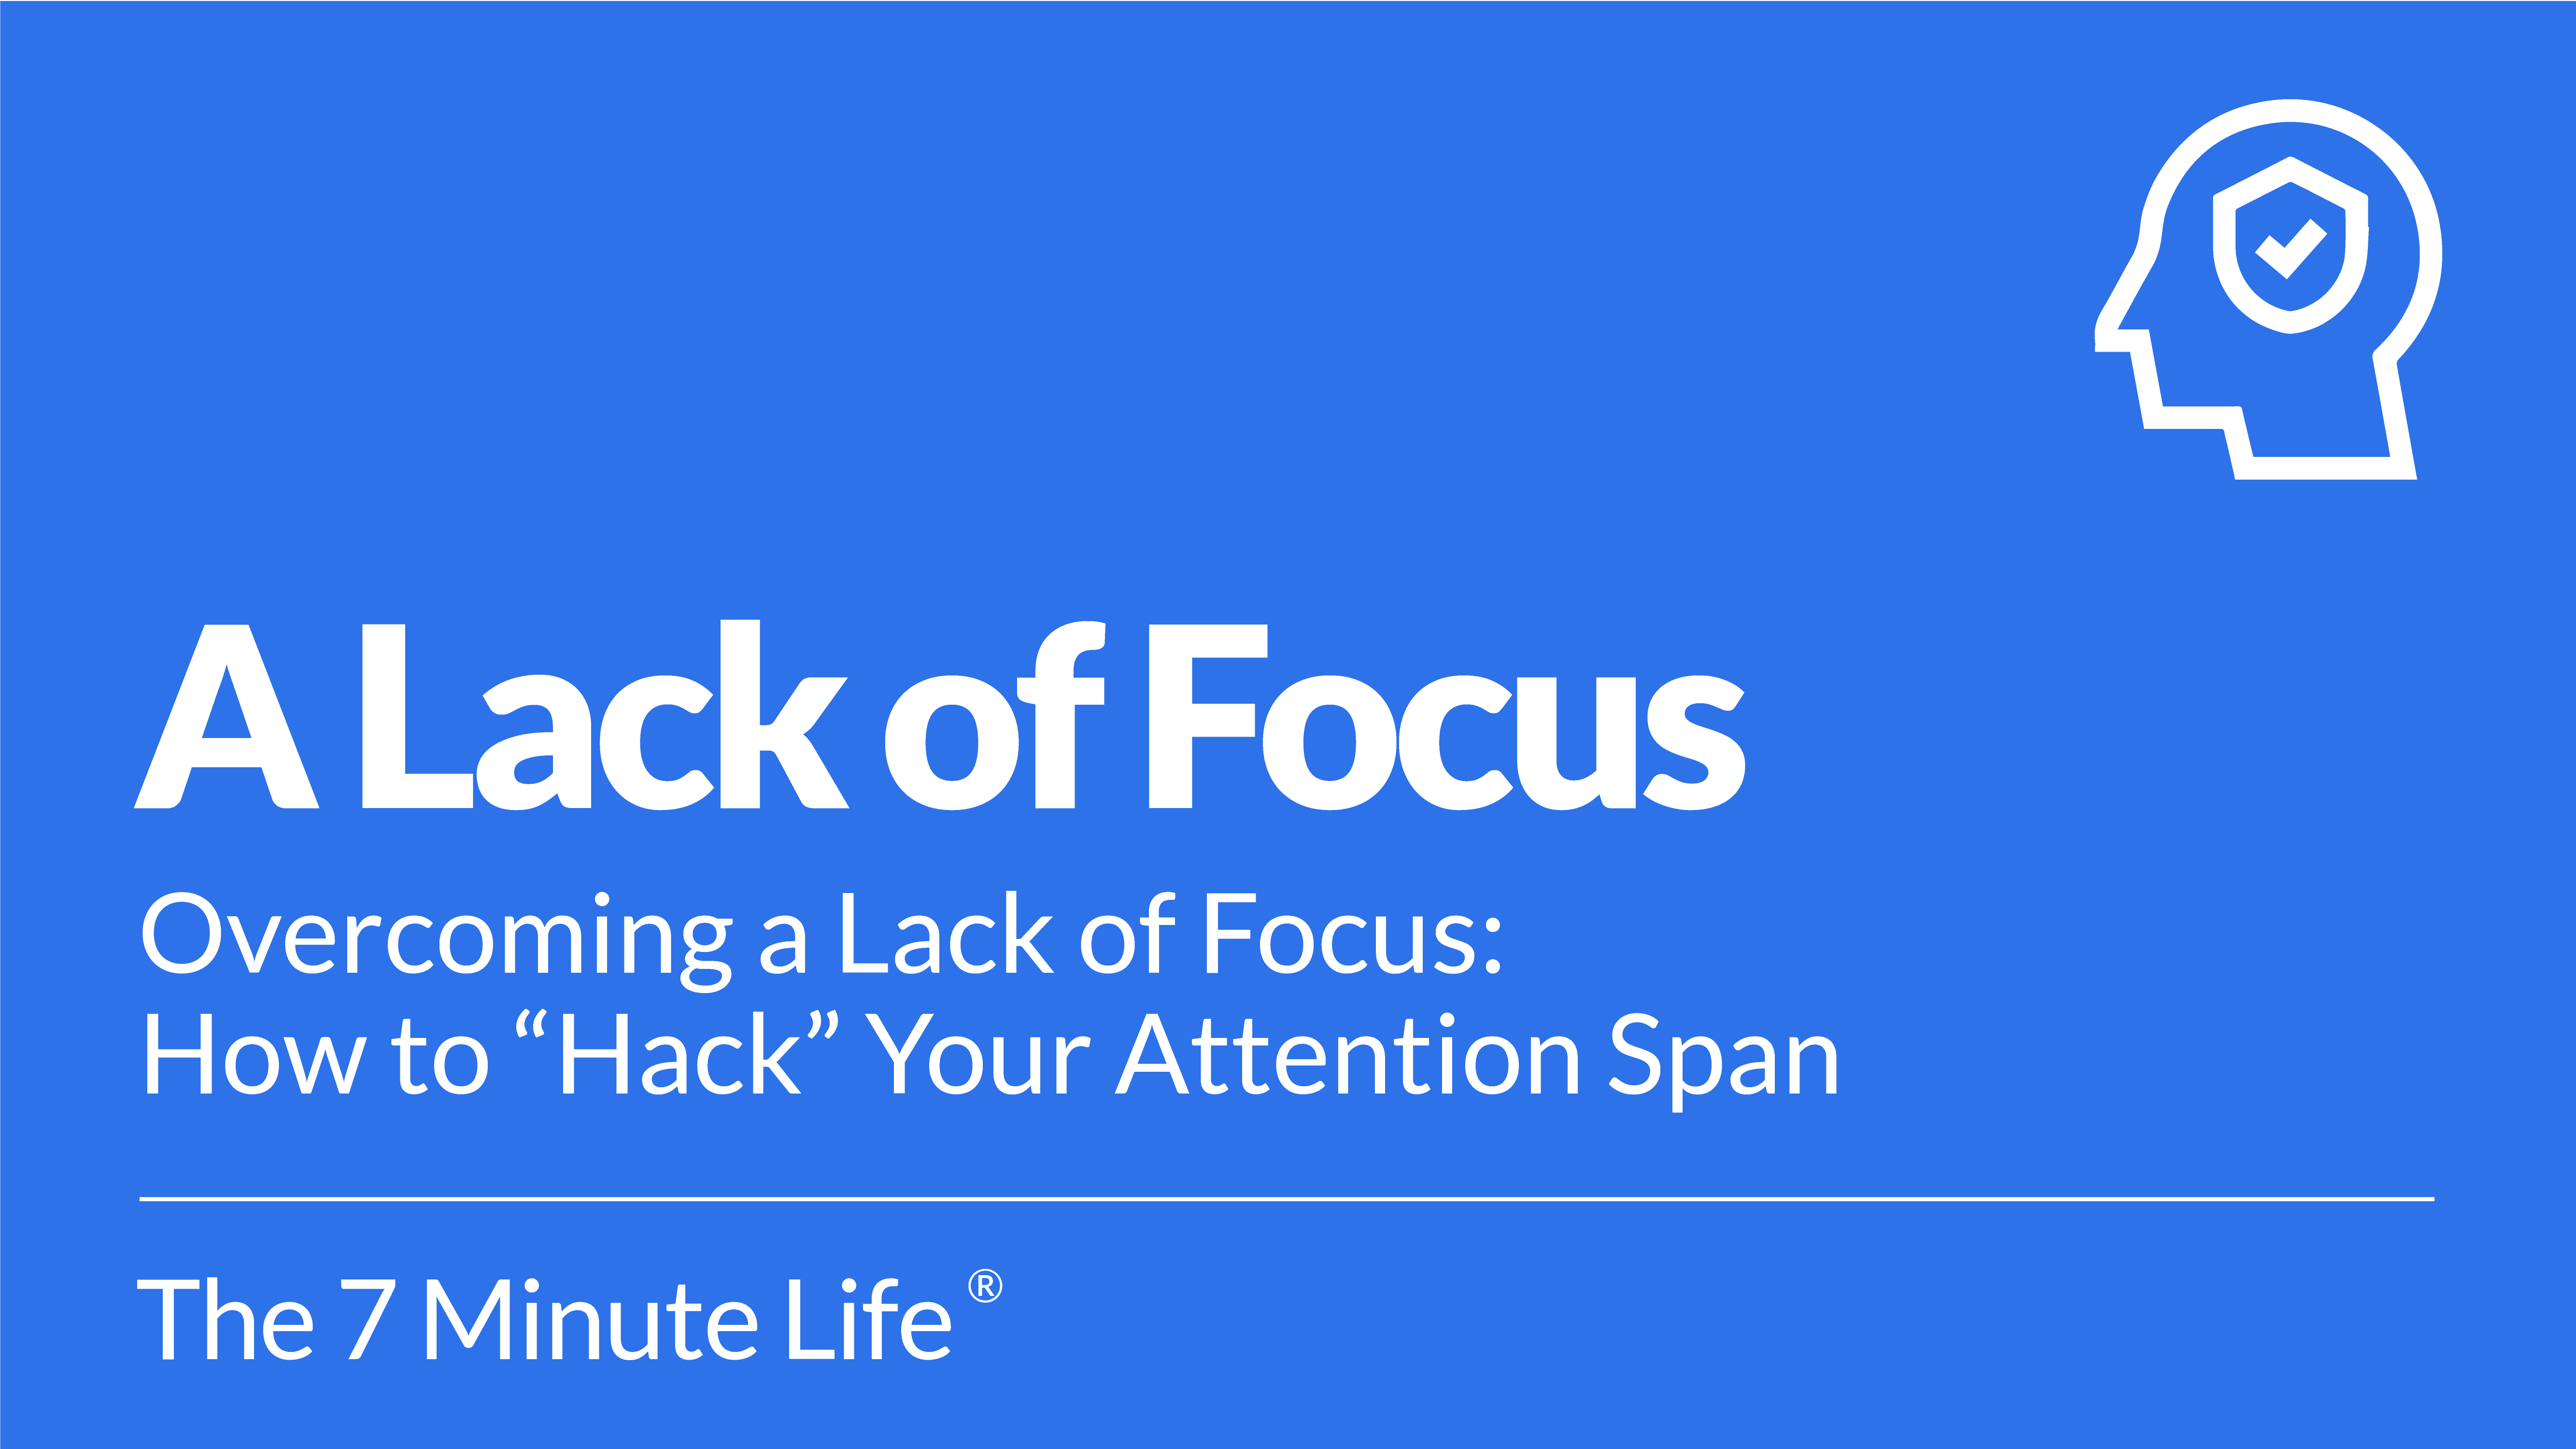 Overcoming a Lack of Focus